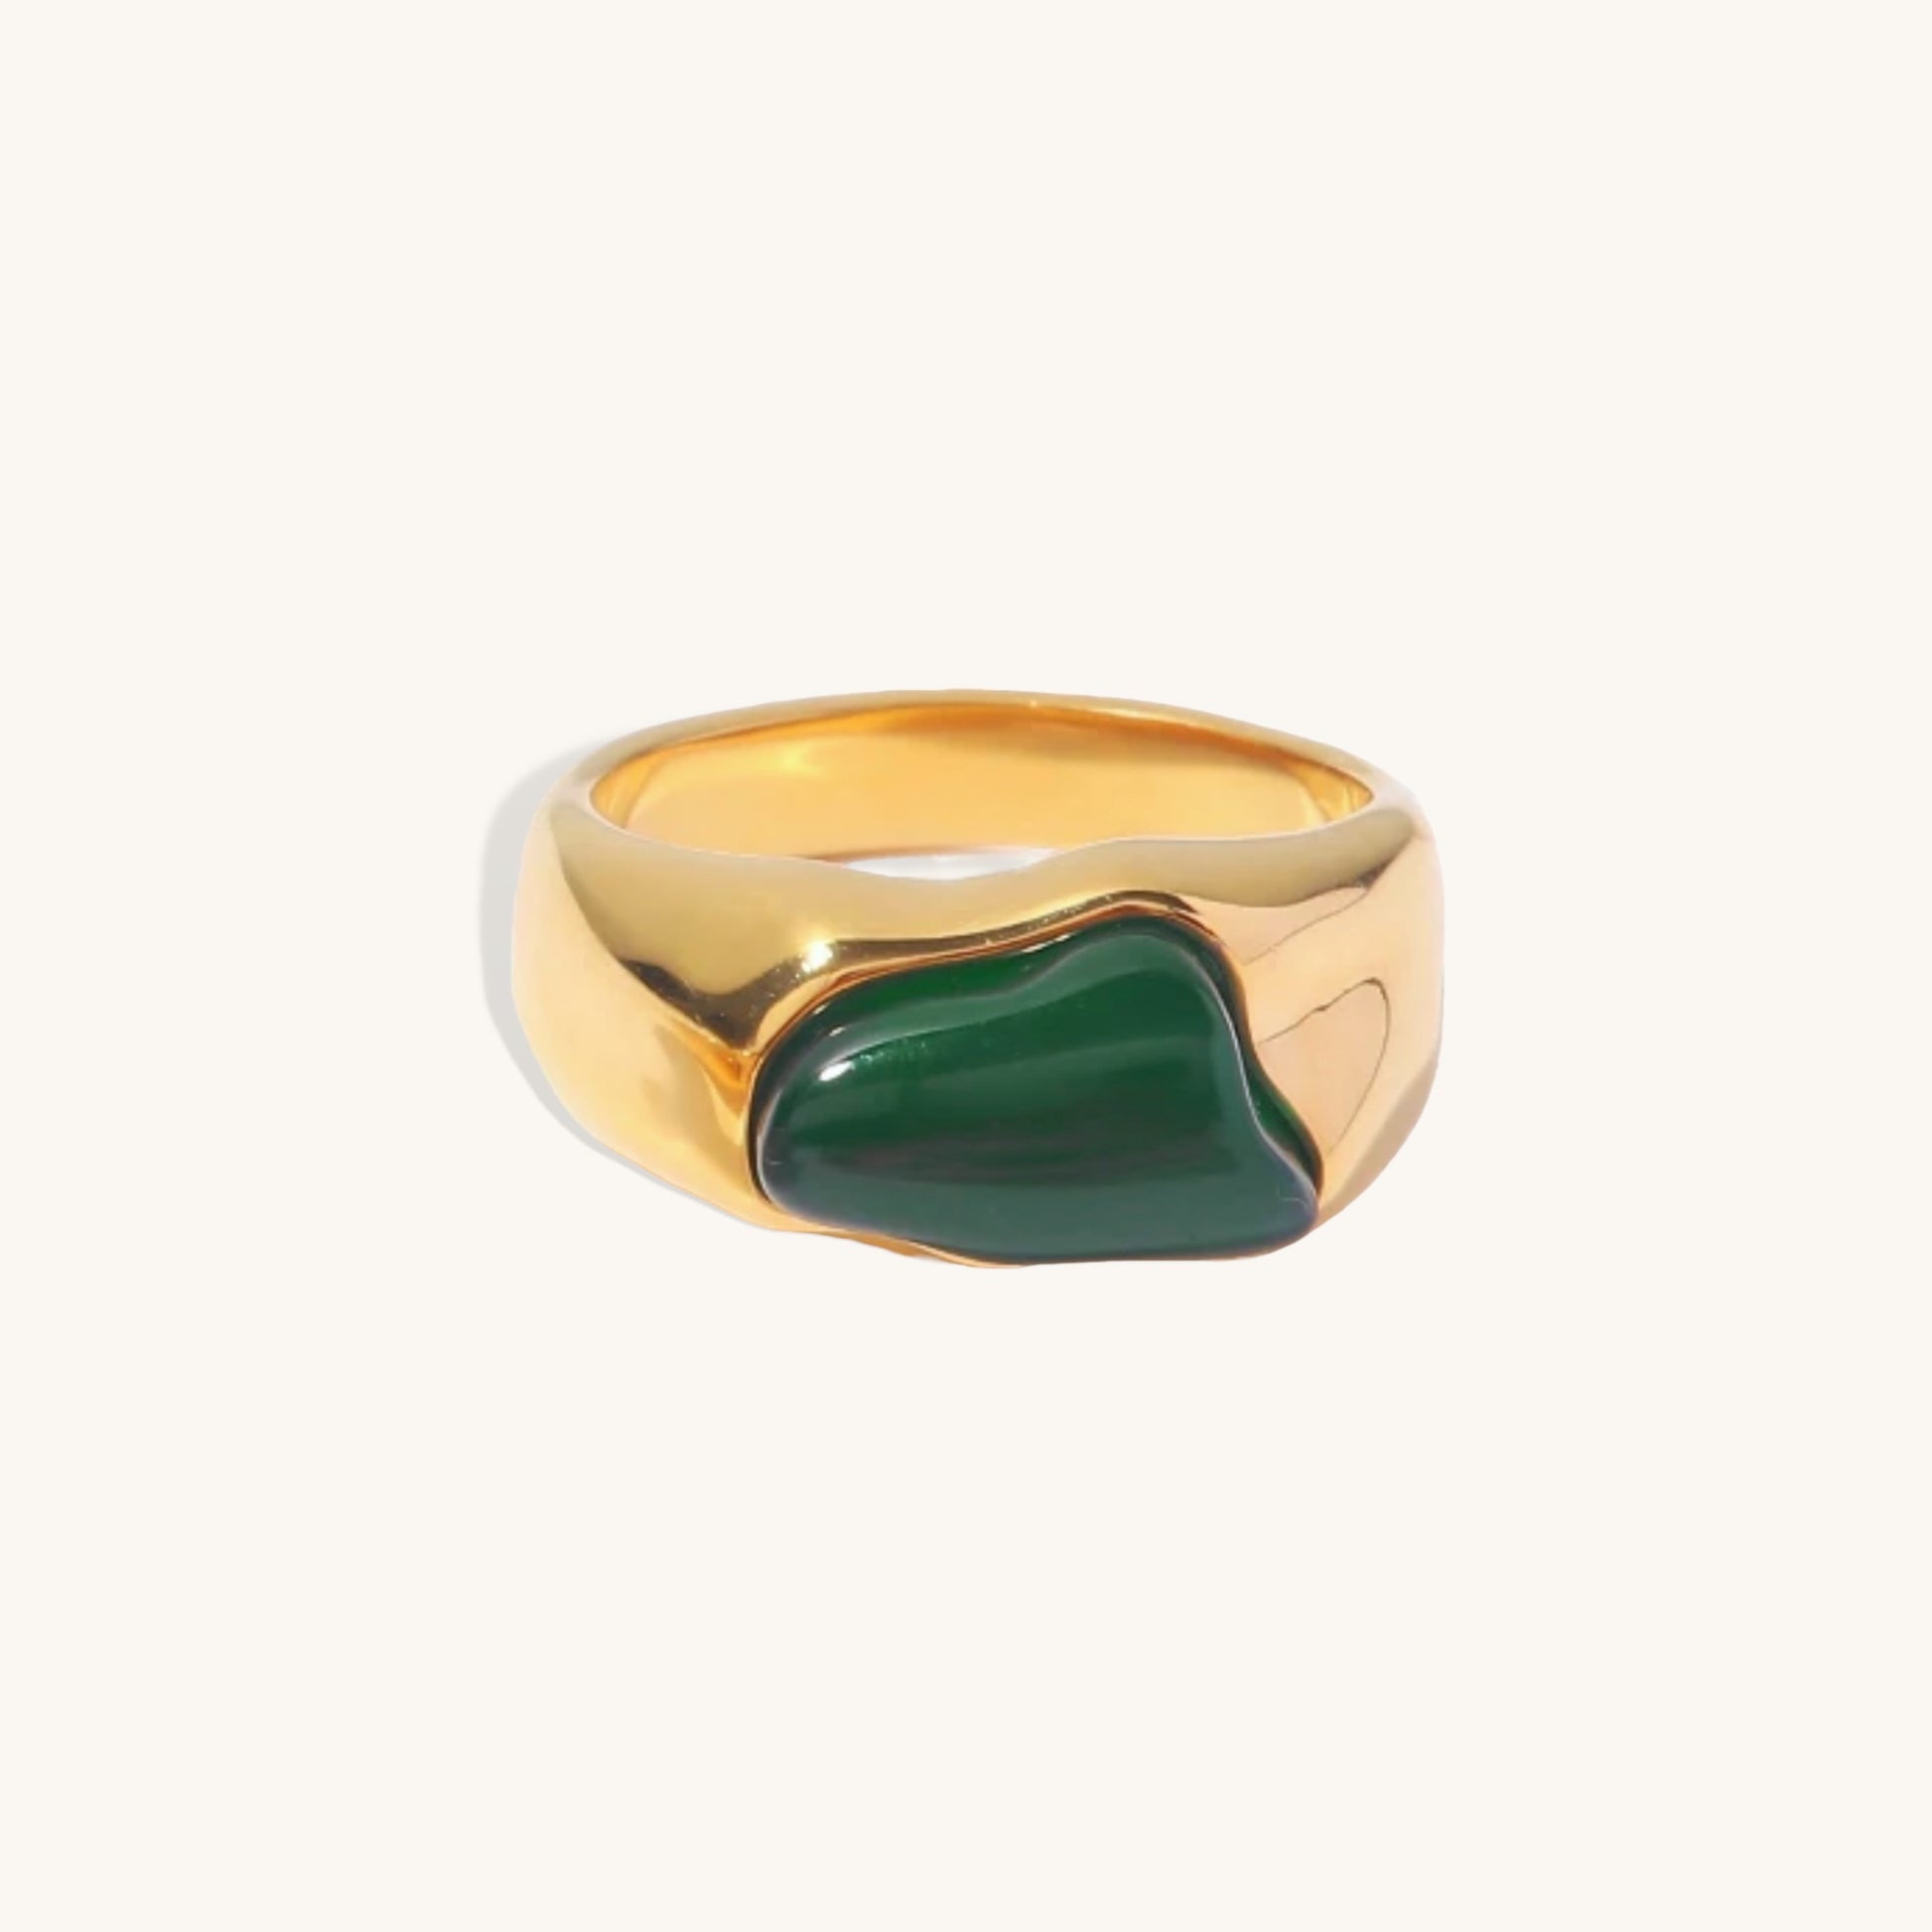 green agate ring, 18k stainless steel agate ring